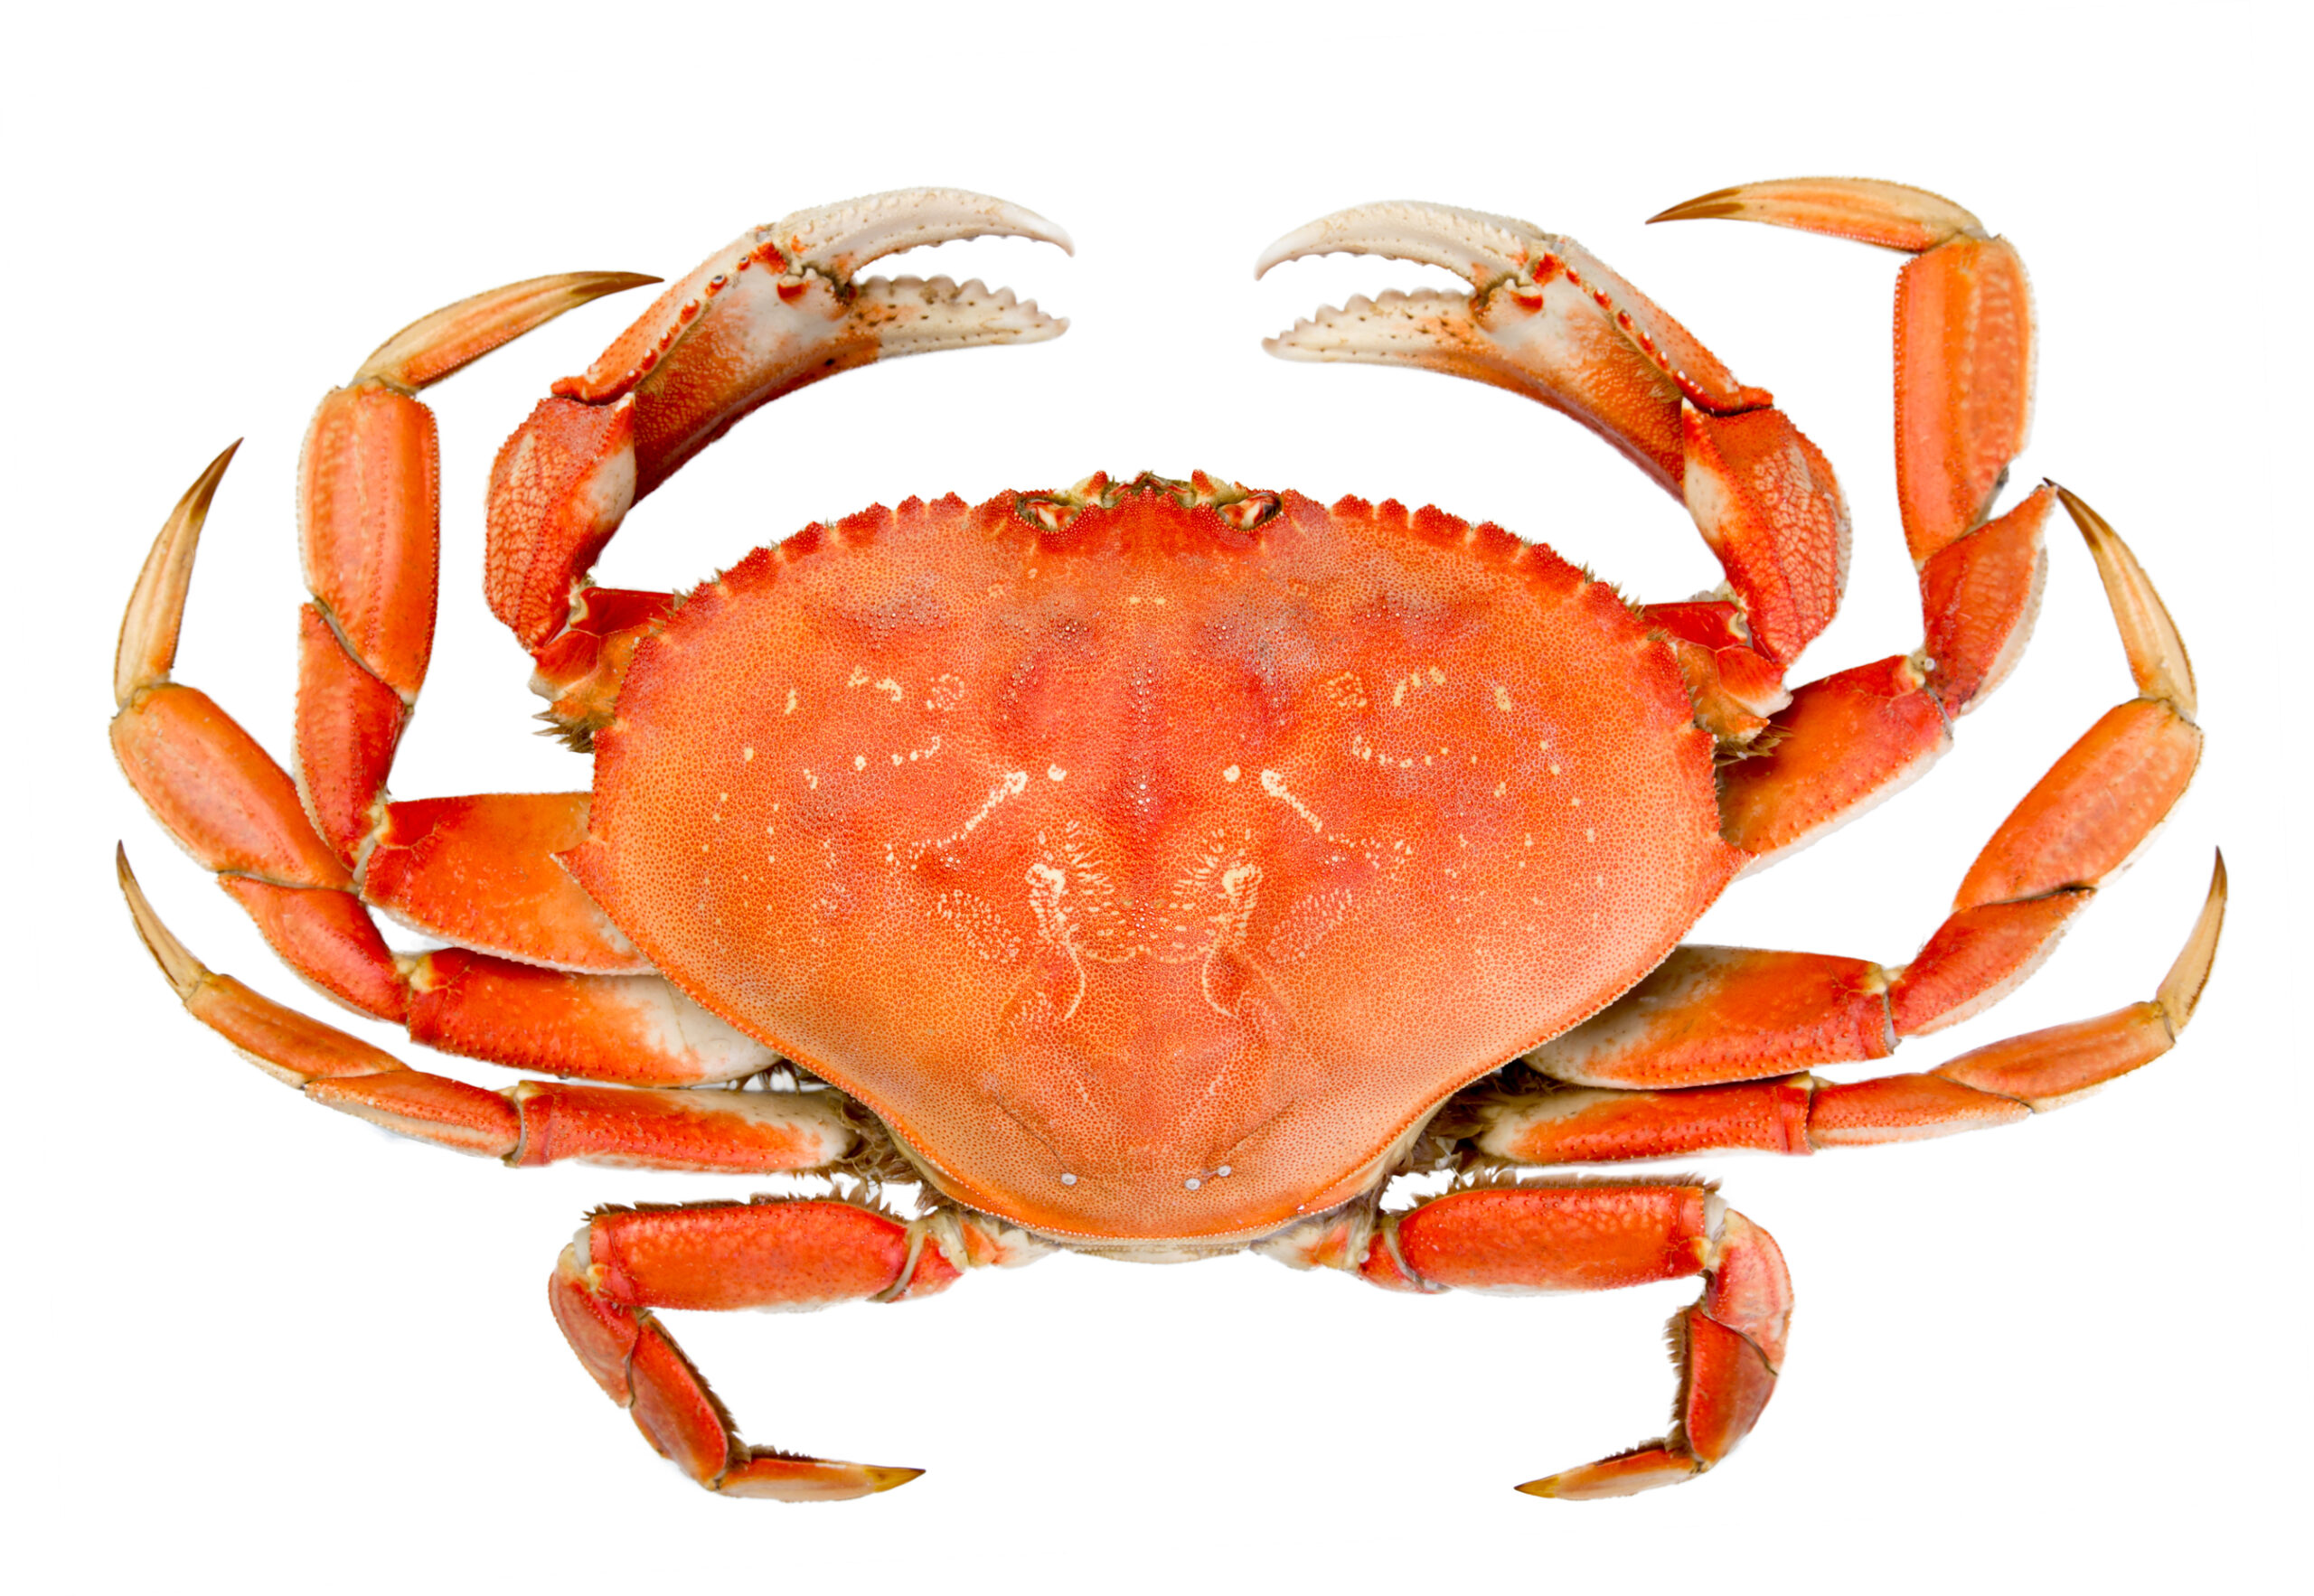 An image of Dungeness crab.